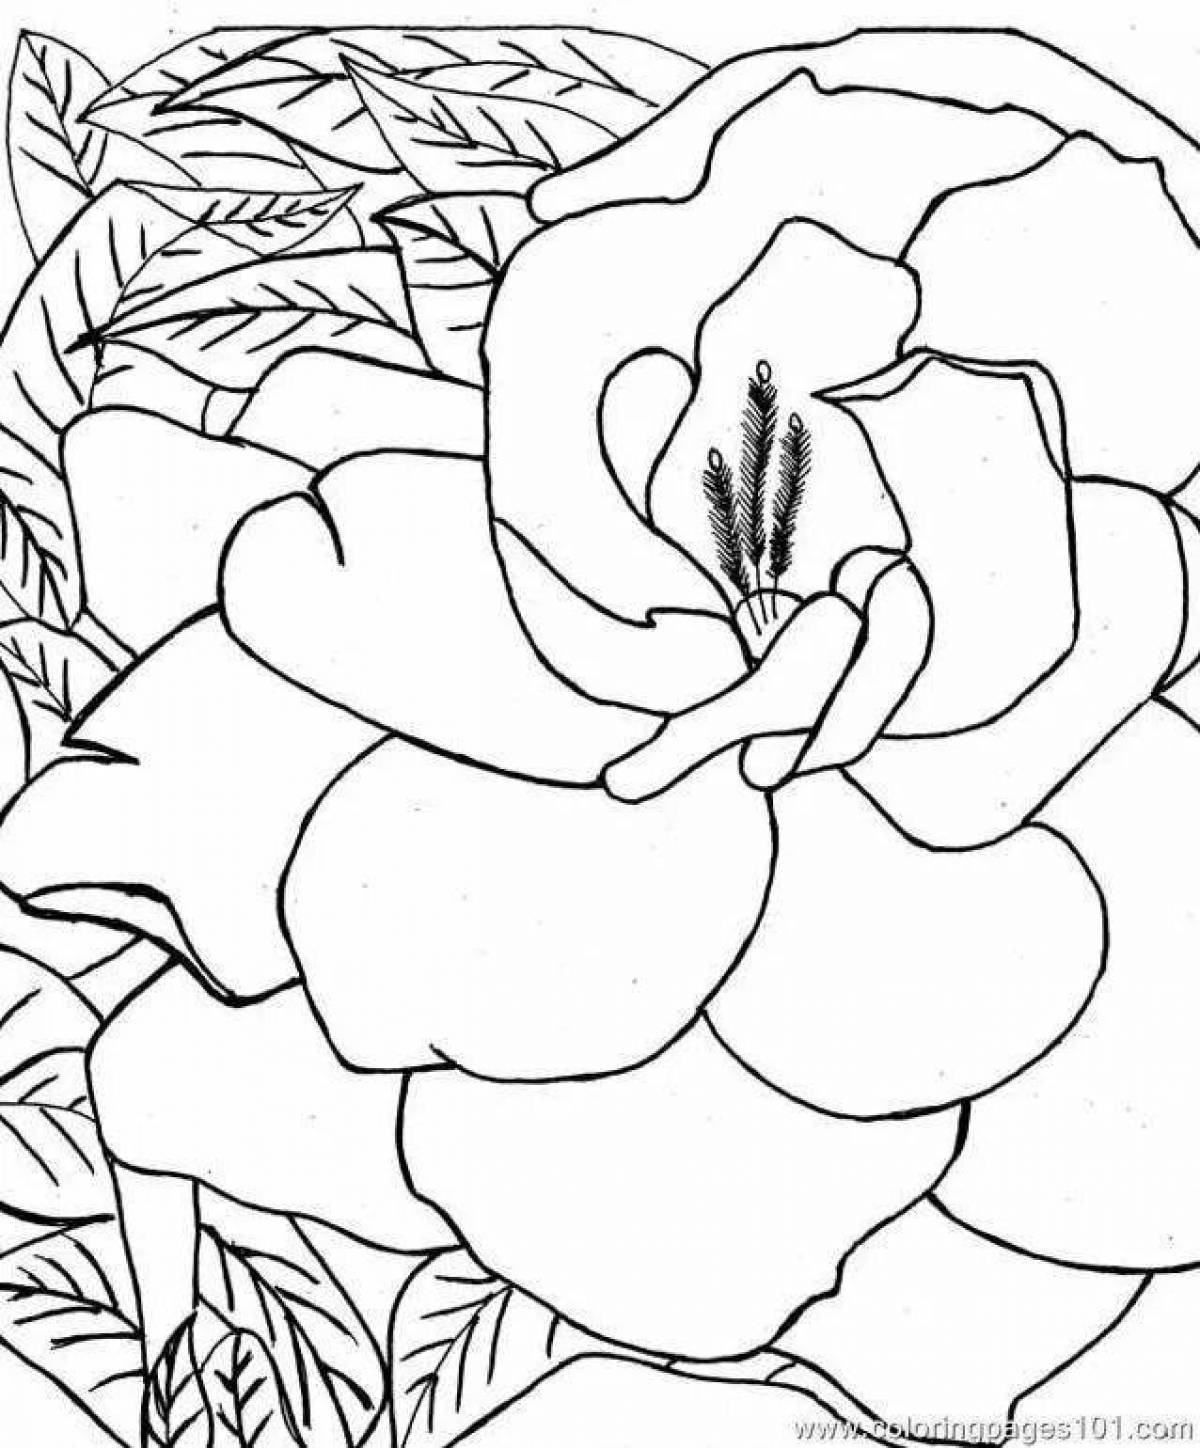 Coloring page magnificent stone flower